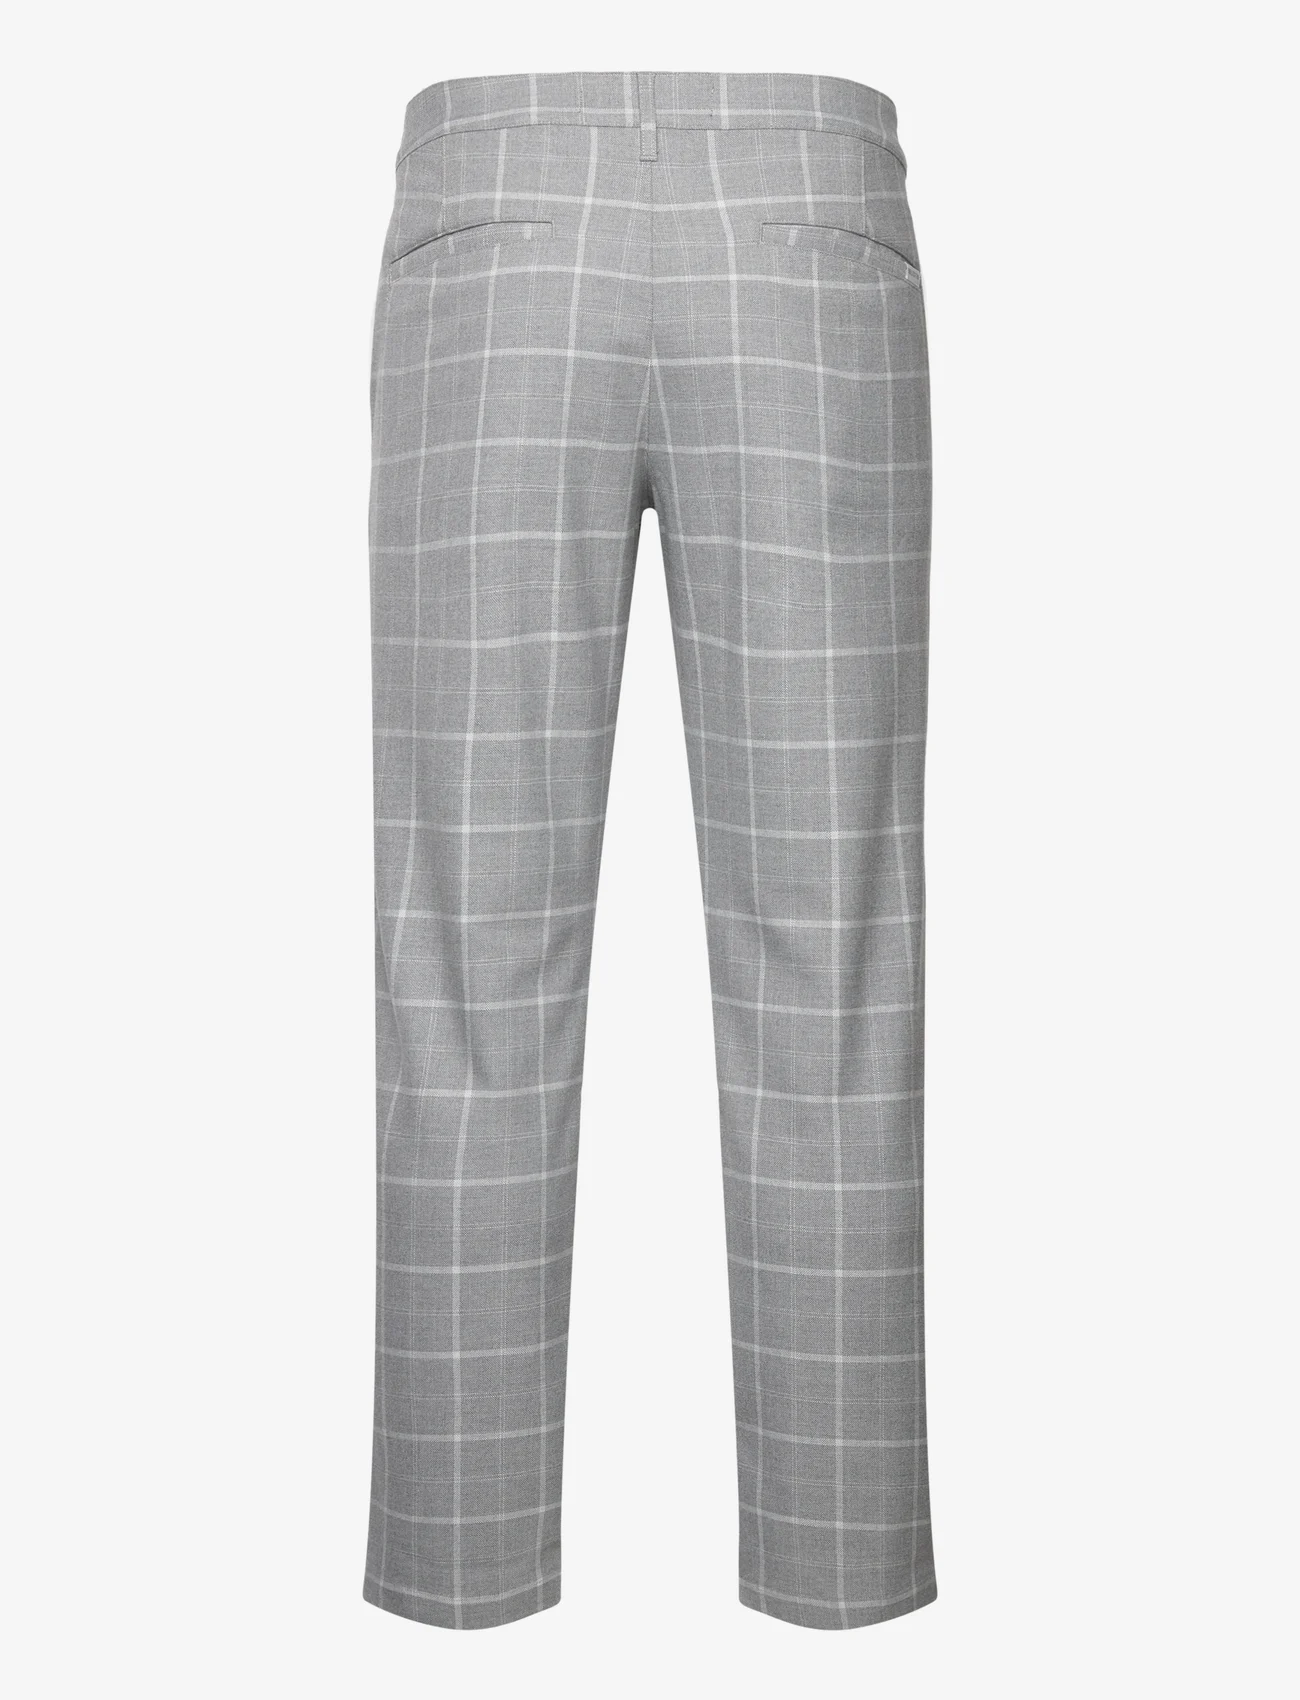 Hollister - HCo. GUYS PANTS - suit trousers - grey plaid - 1